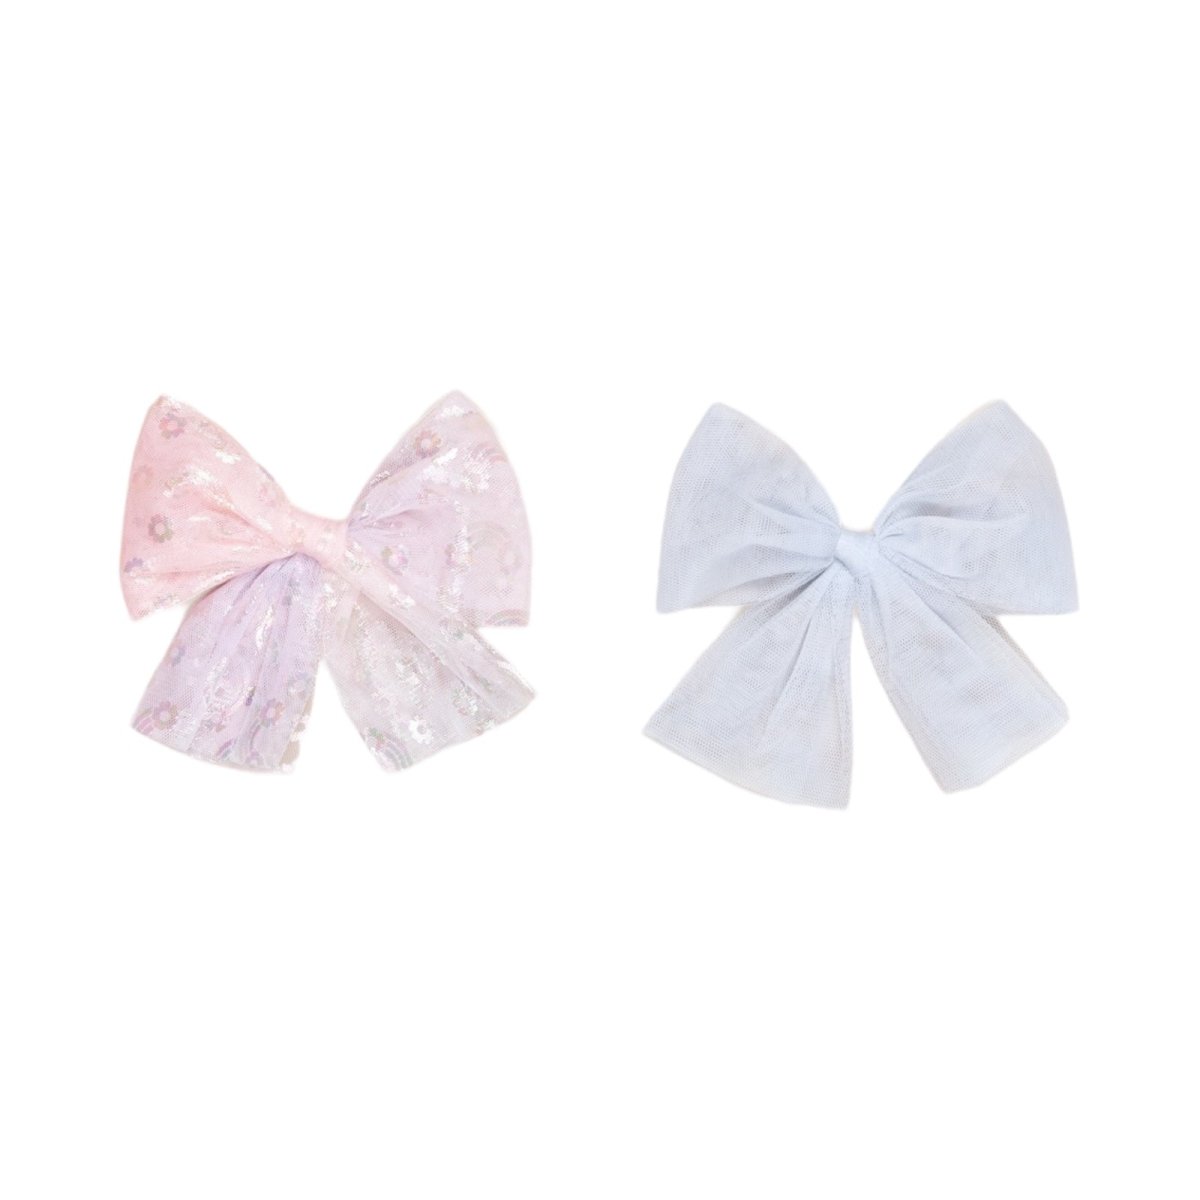 RAINBOW BOW TULLE 2 PACK CLIPS - HUXBABY